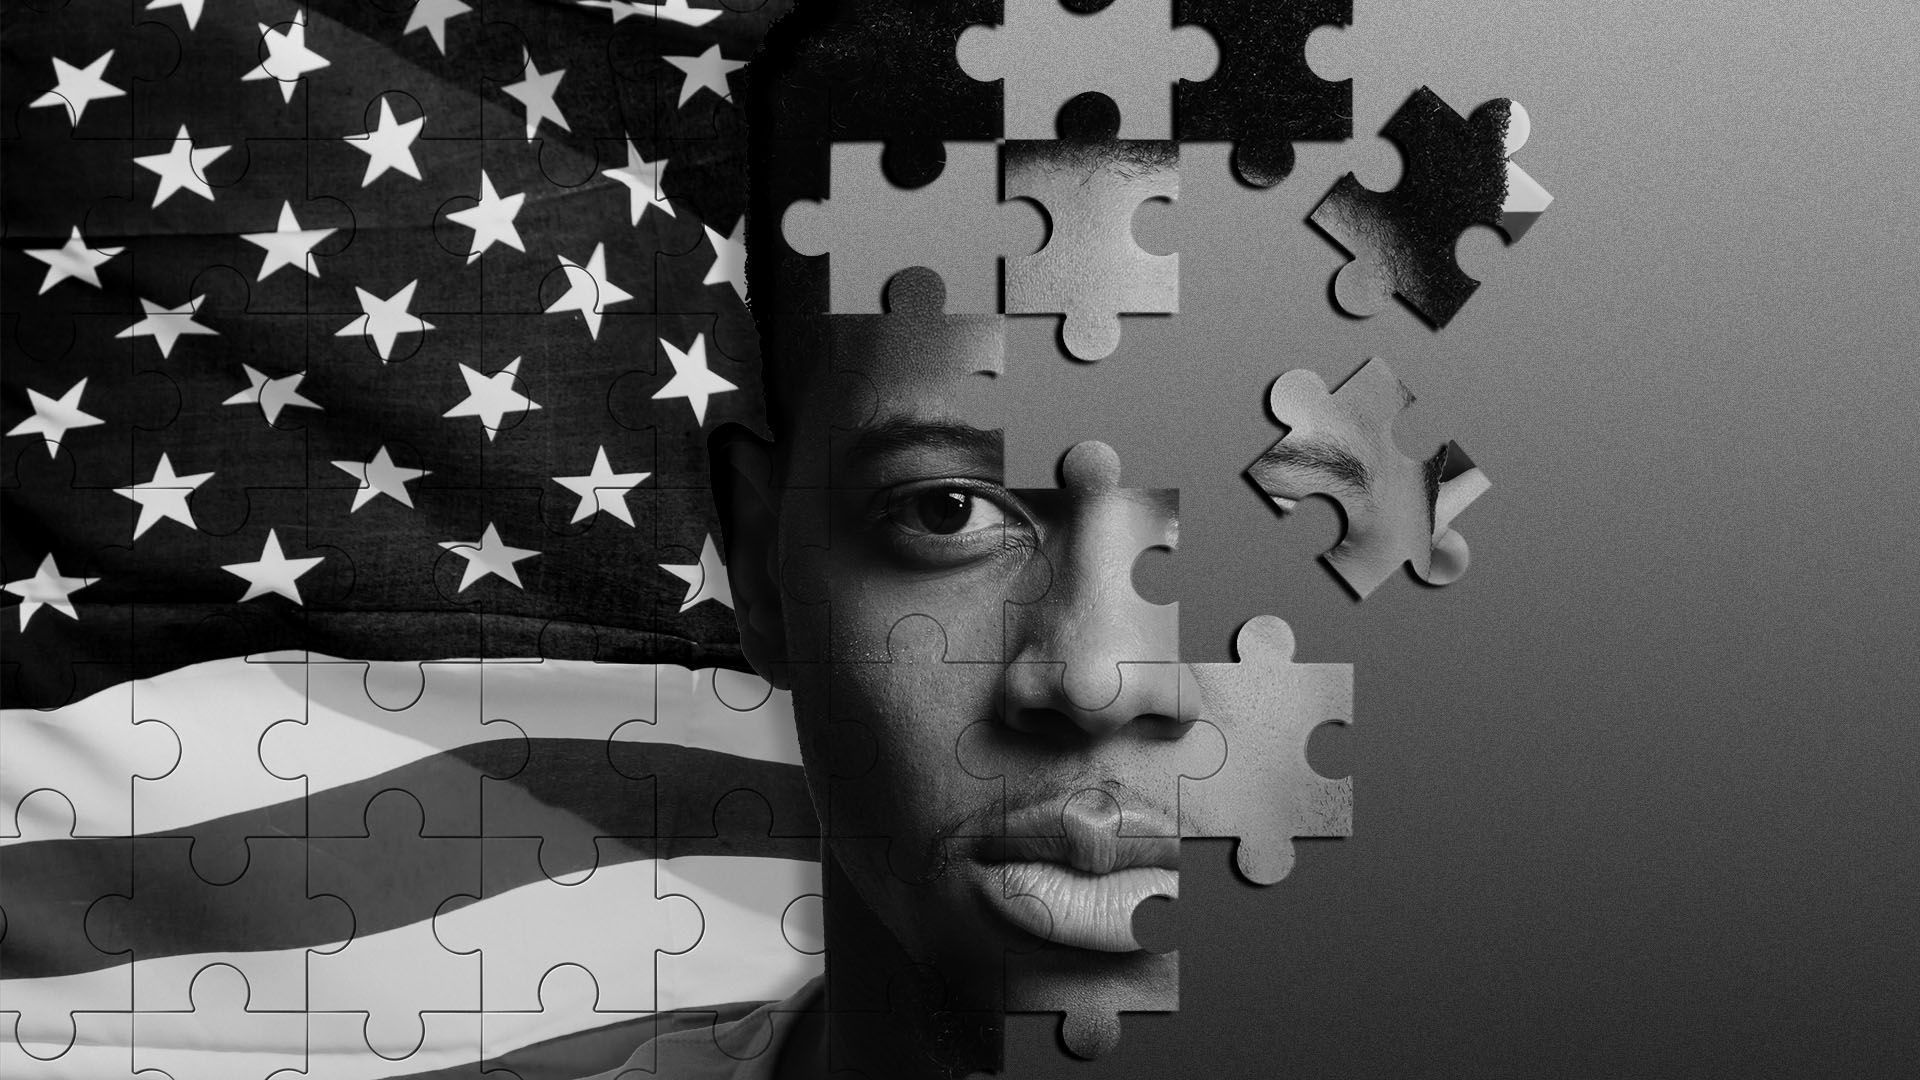 A an illustration of a puzzle making up a Black man's face